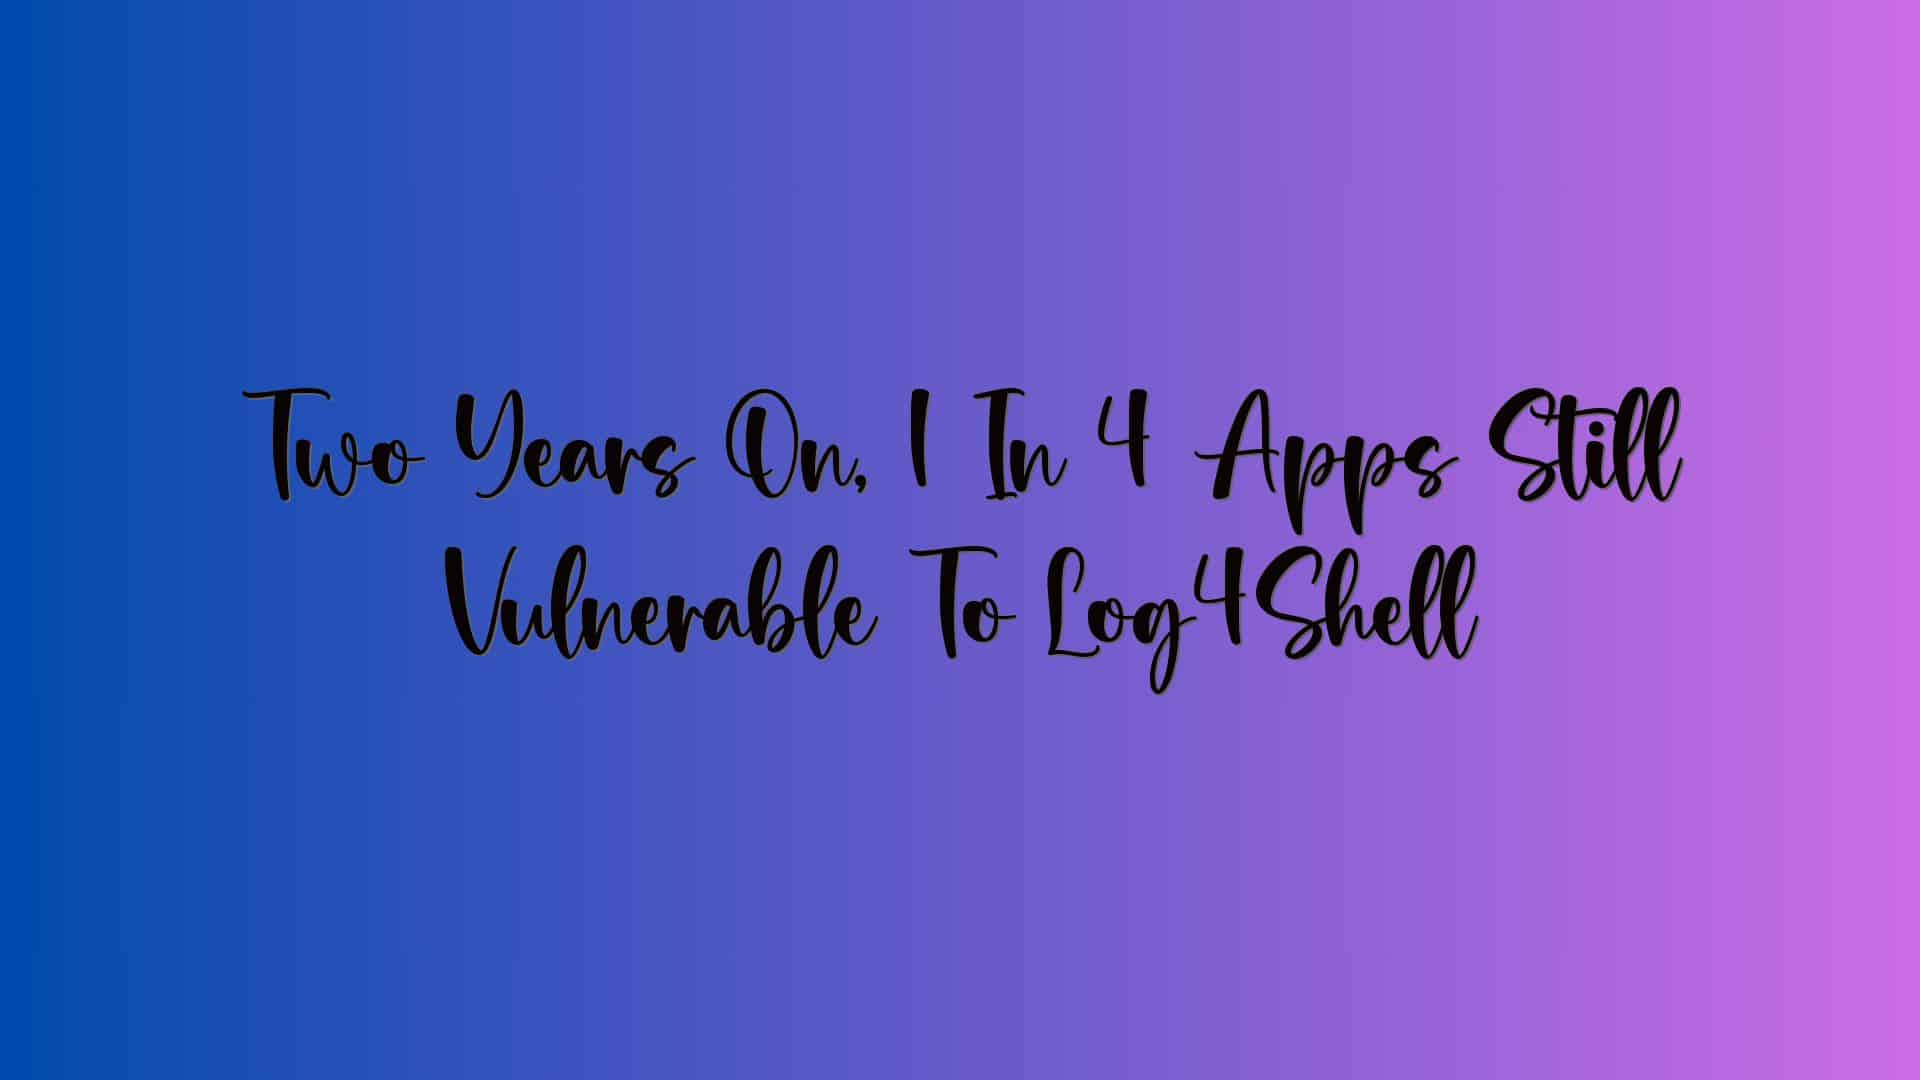 Two Years On, 1 In 4 Apps Still Vulnerable To Log4Shell